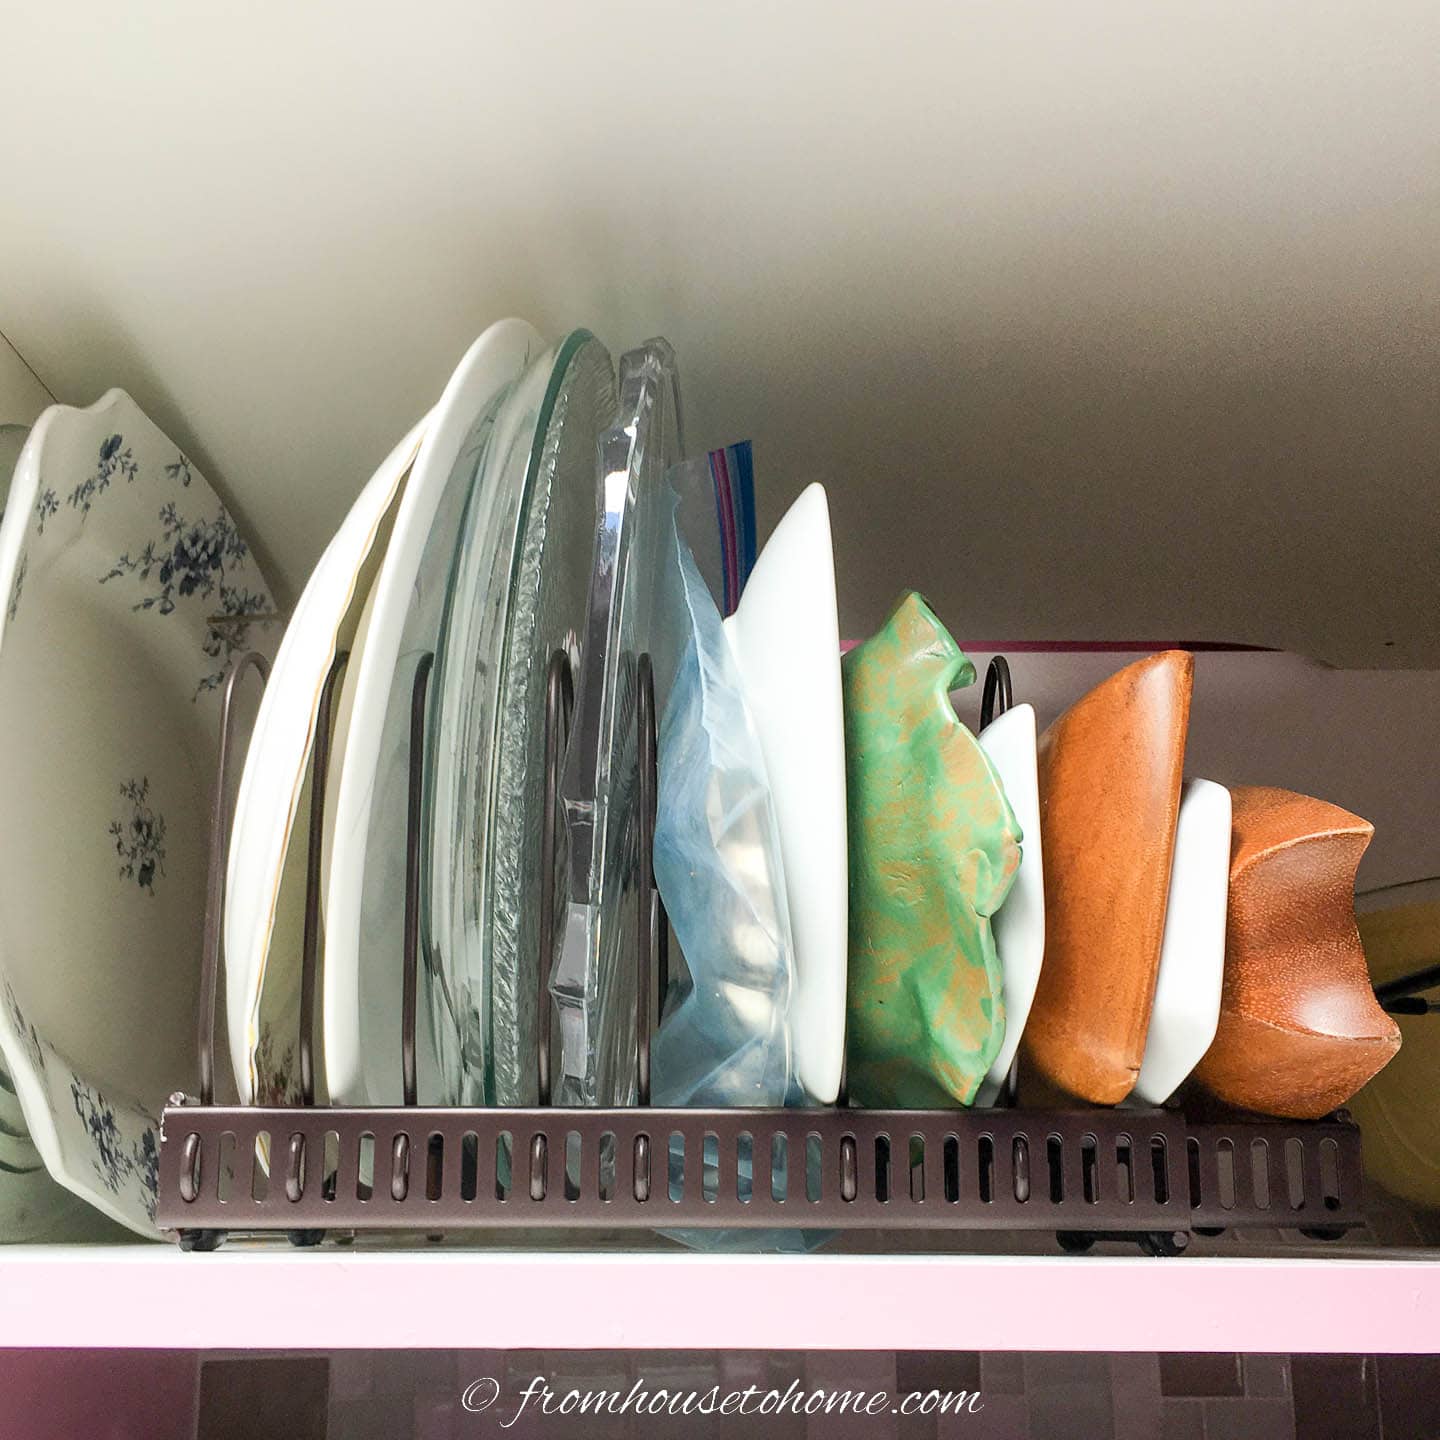 Pot rack used as large platter storage above the refrigerator